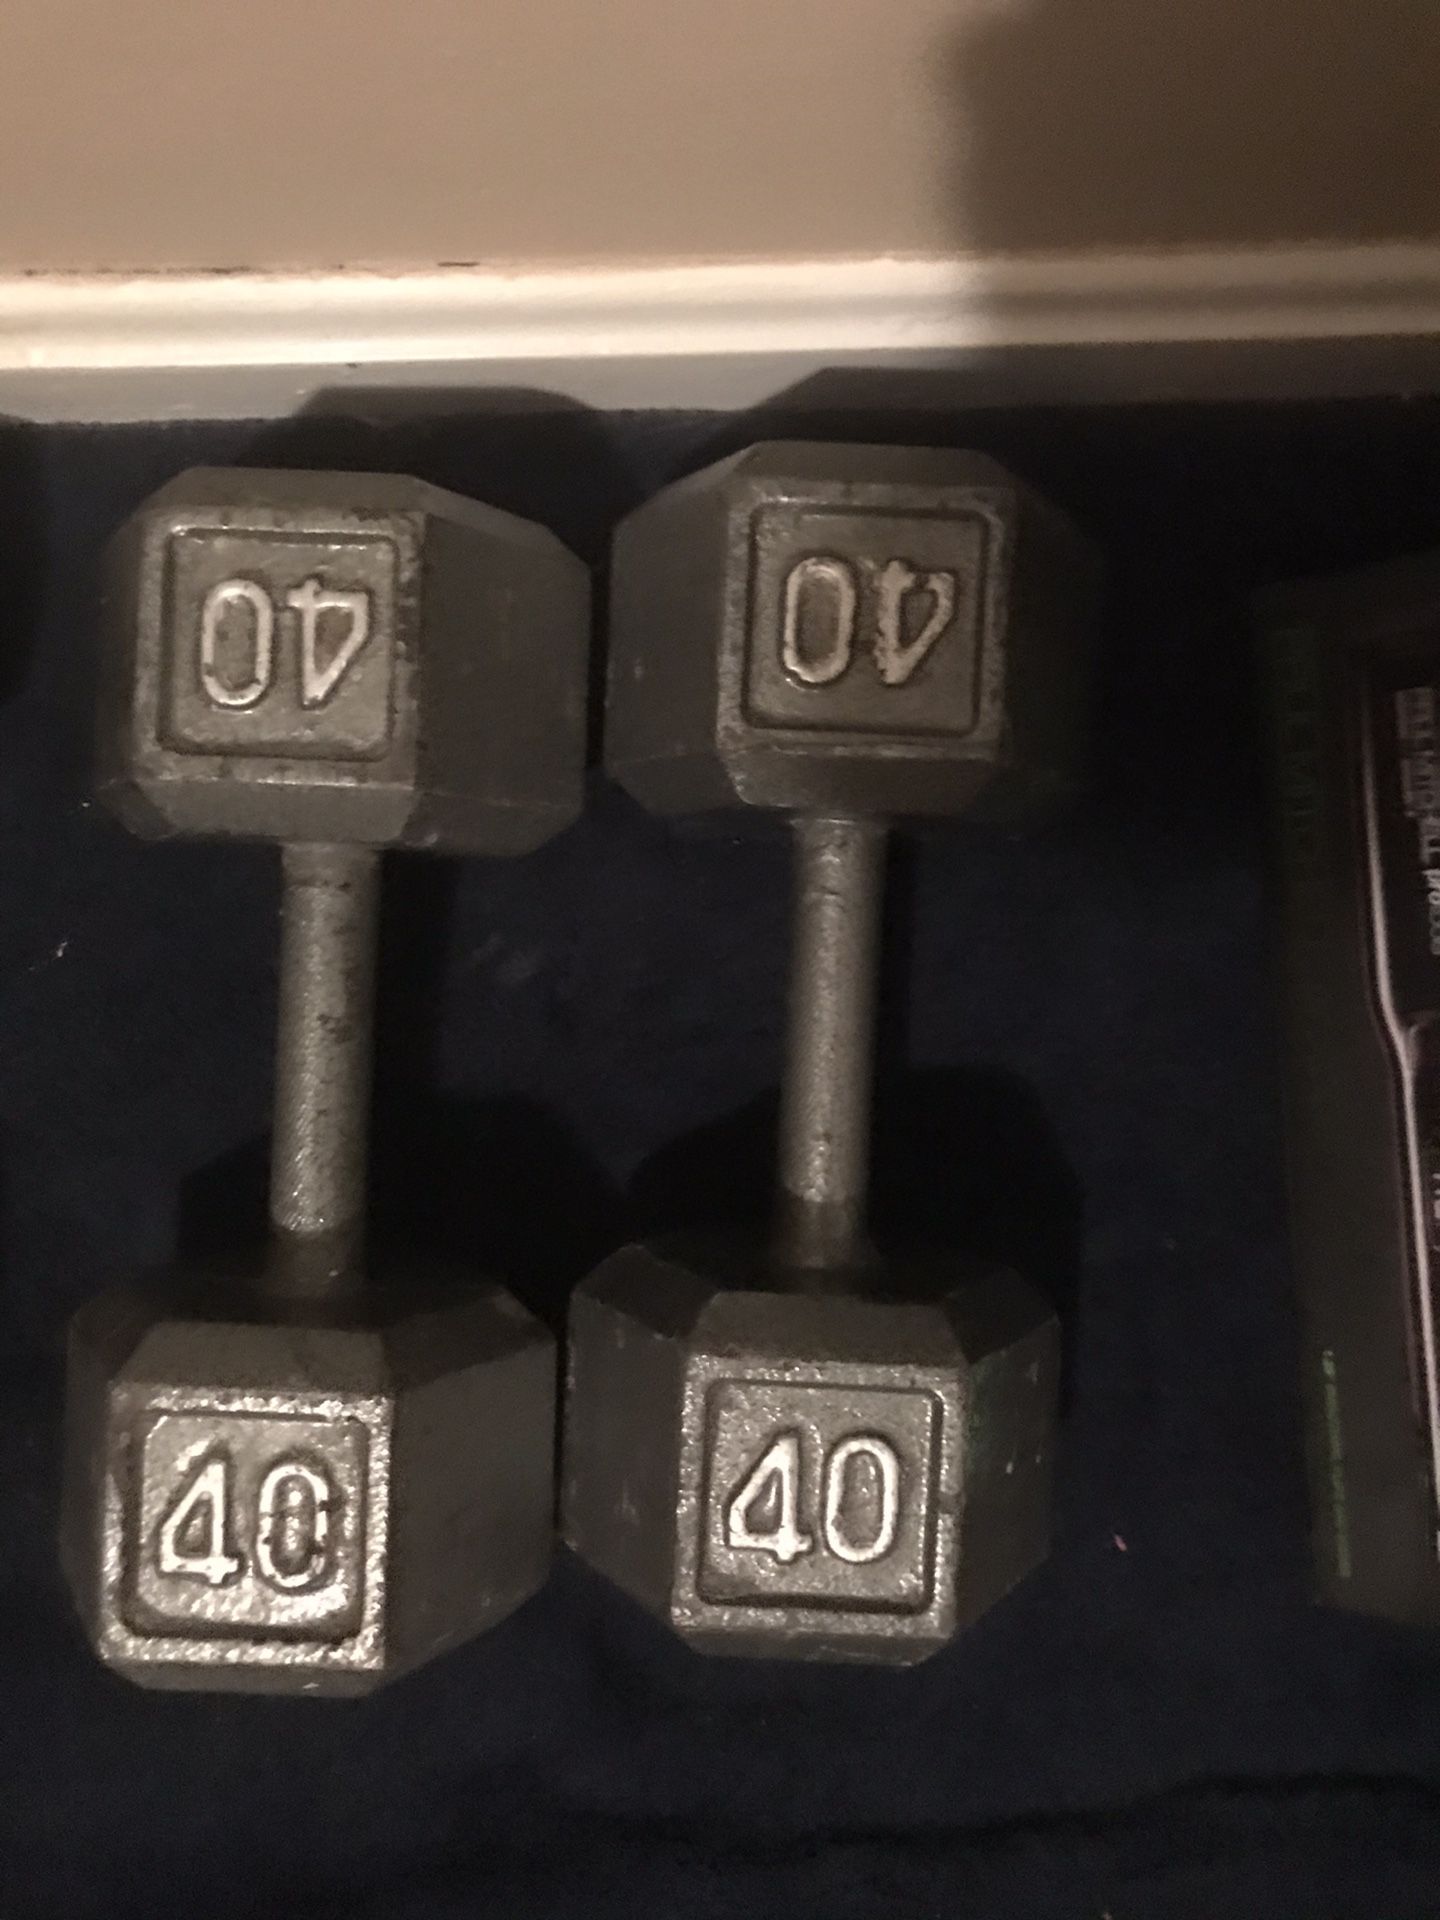 Dumbbells 25s and black 30s and 45s a gray package deal